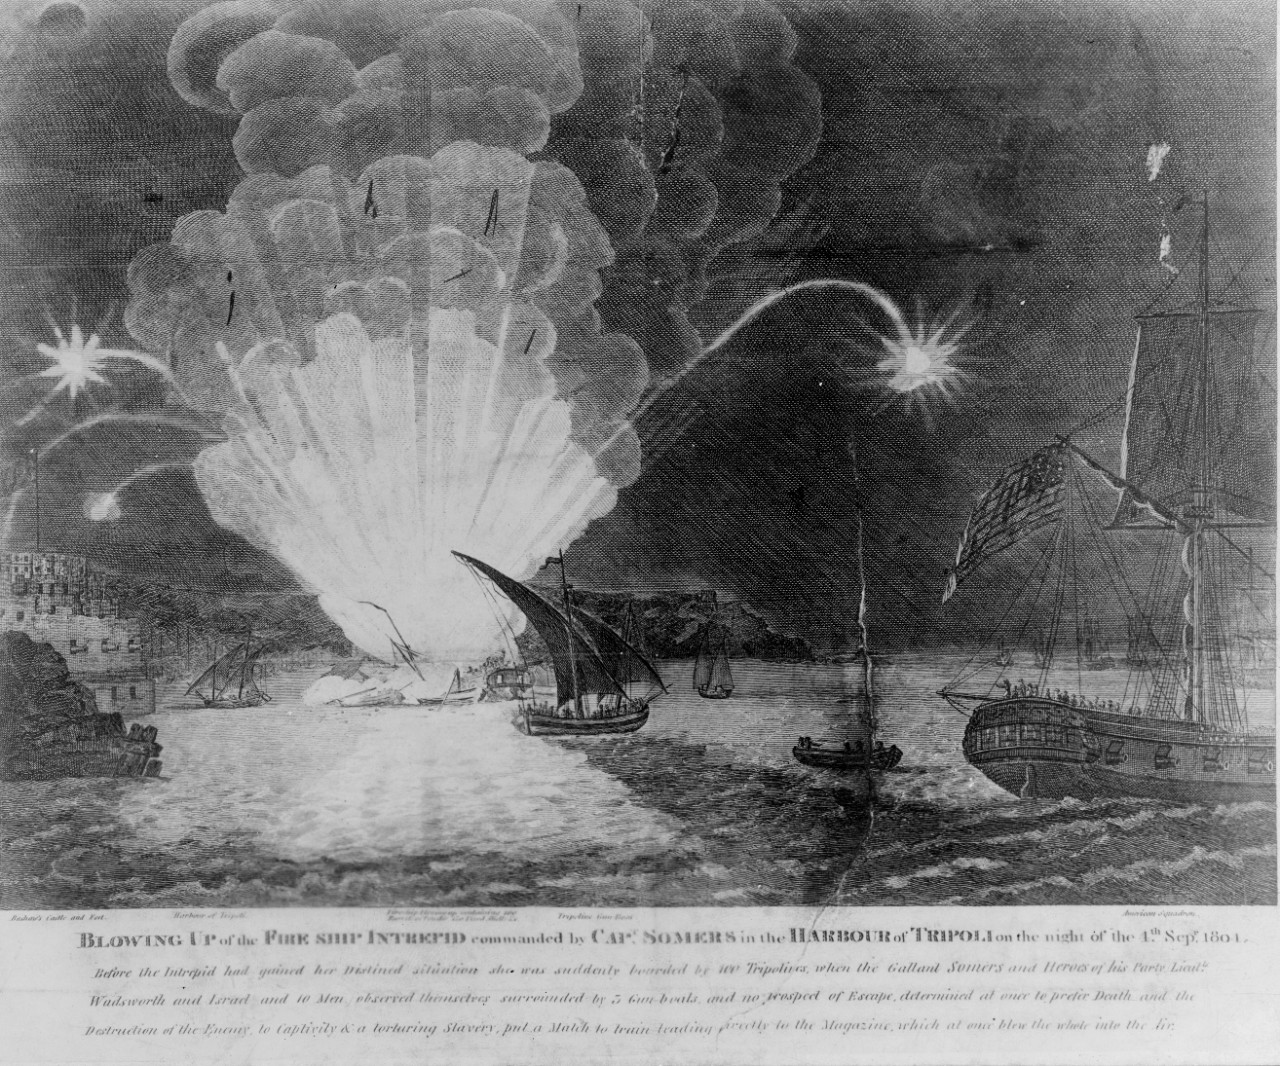 Photo #: NH 53248  &quot;Blowing Up of the Fire ship Intrepid commanded by Capt. Somers in the Harbour of Tripoli on the night of the 4th Sepr. 1804&quot;